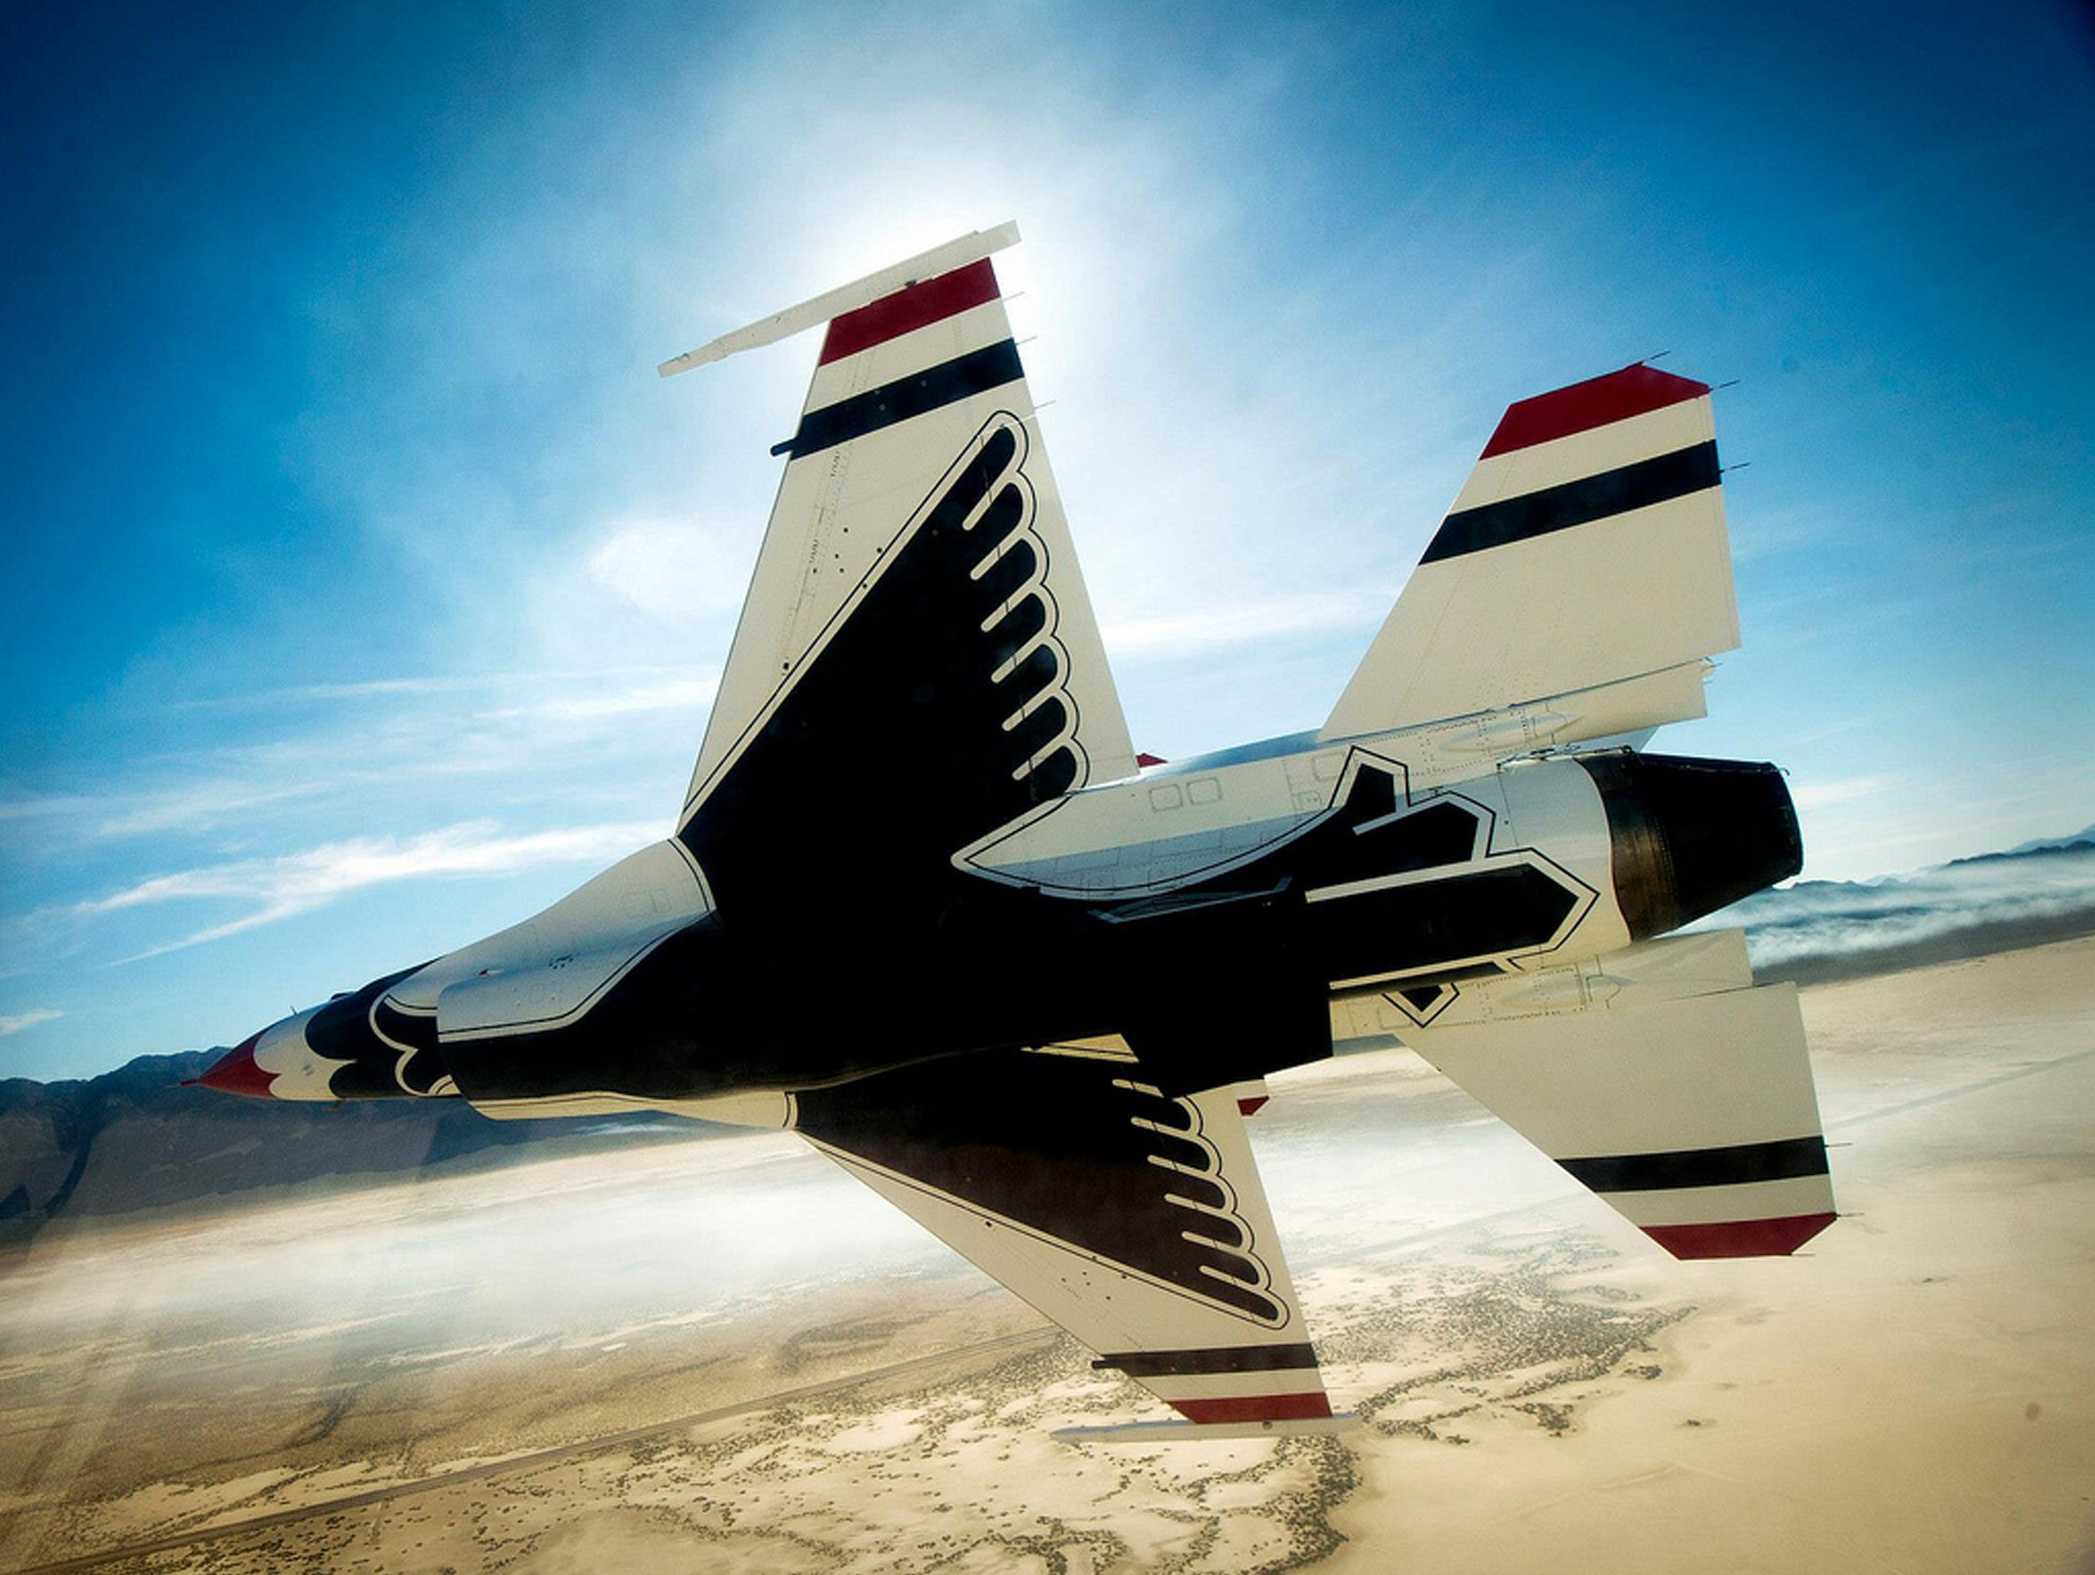 Coolest Us Air Force Wallpaper - United States Air Force Thunderbirds - HD Wallpaper 